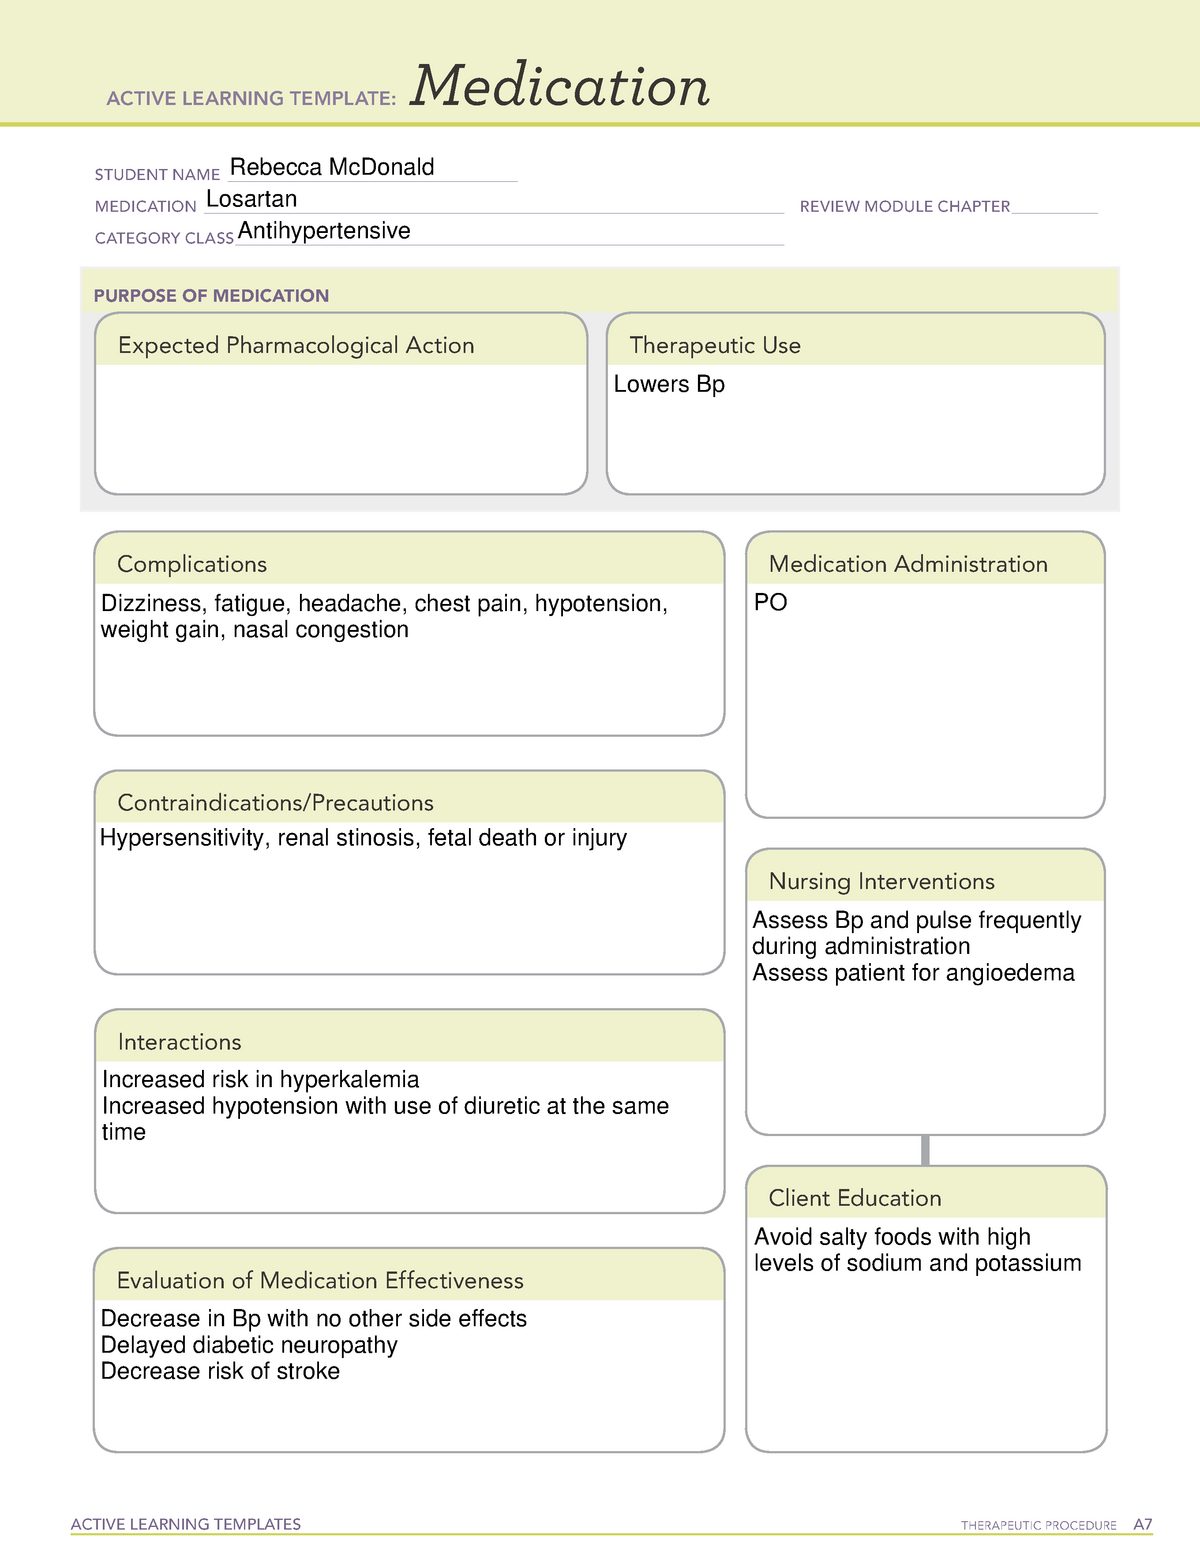 Losartan Med Card Template ACTIVE LEARNING TEMPLATES THERAPEUTIC